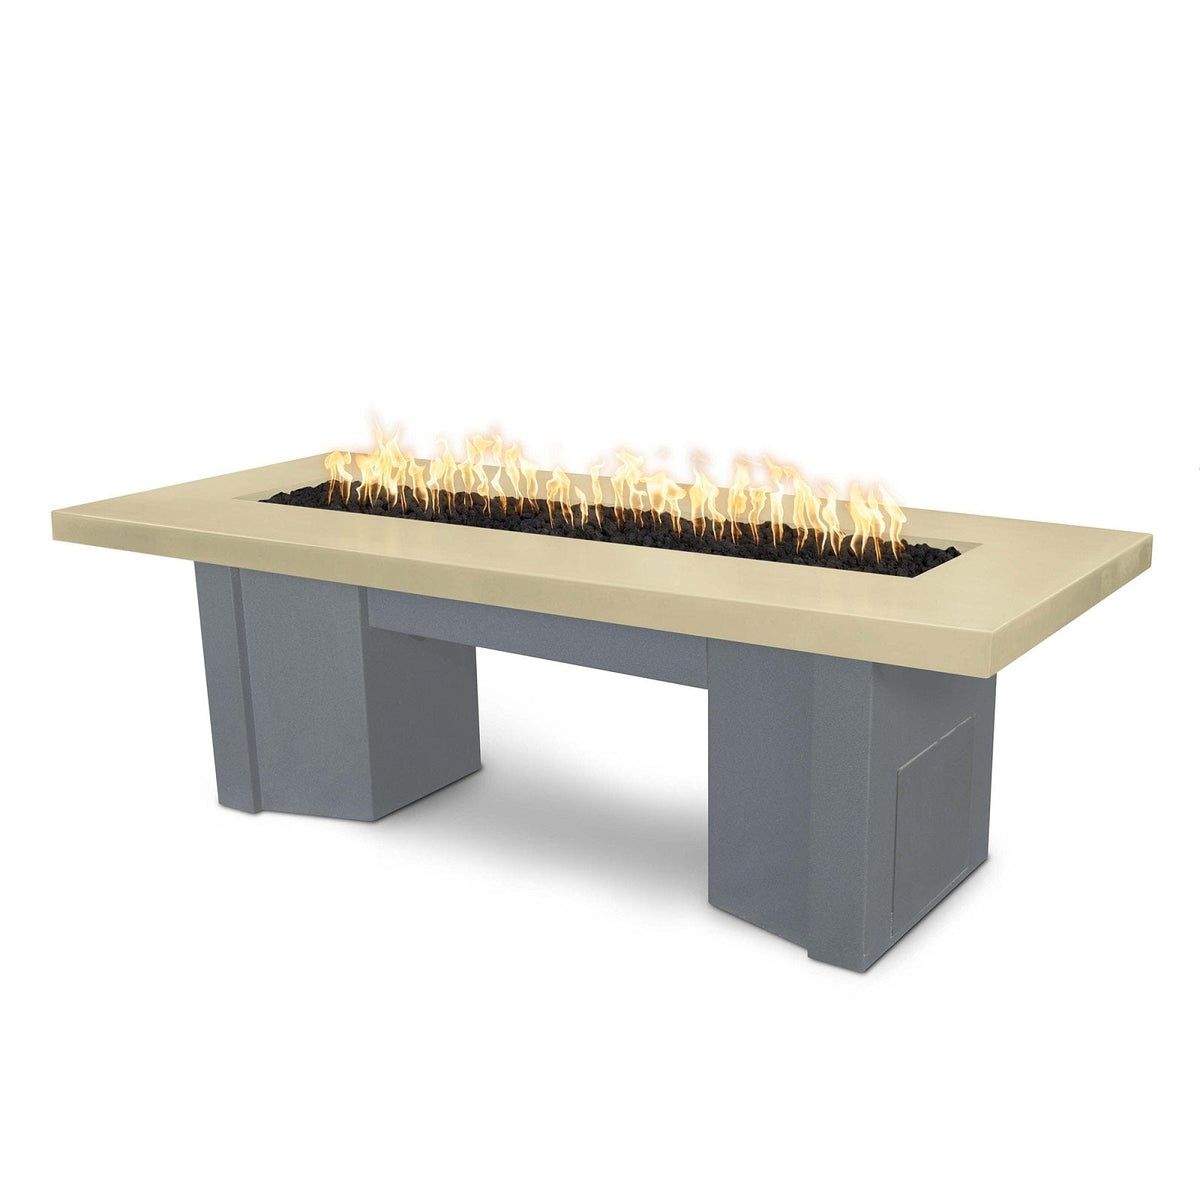 The Outdoor Plus Fire Features Vanilla (-VAN) / Gray Powder Coated Steel (-GRY) The Outdoor Plus 60&quot; Alameda Fire Table Smooth Concrete in Liquid Propane - 110V Plug &amp; Play Electronic Ignition / OPT-ALMGFRC60EKIT-LP